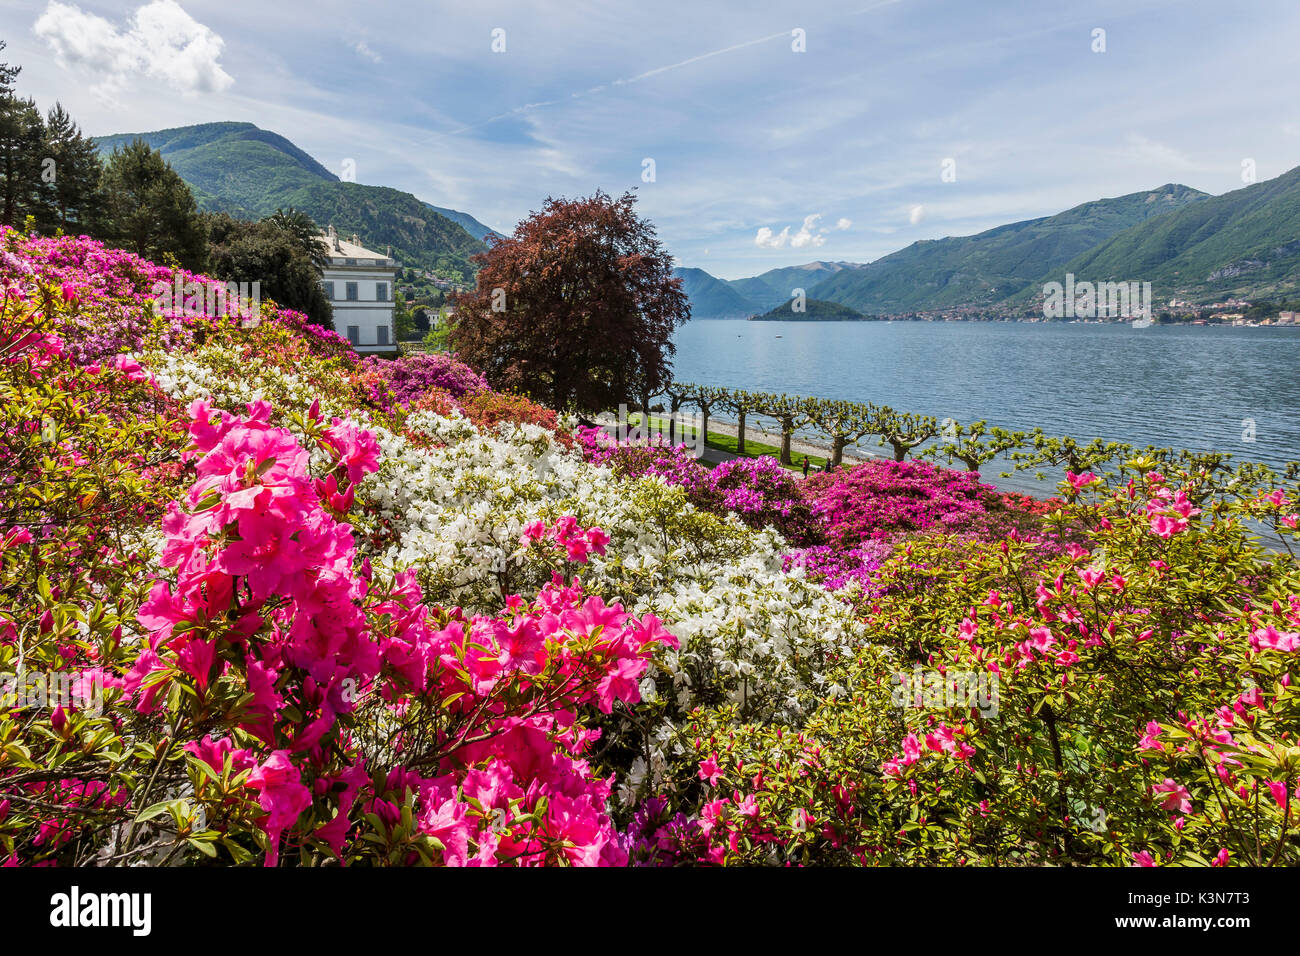 Flowers in the gardens of Villa Melzi d'Eril in Bellagio, Lake Como, Lombardy, Italy. Stock Photo